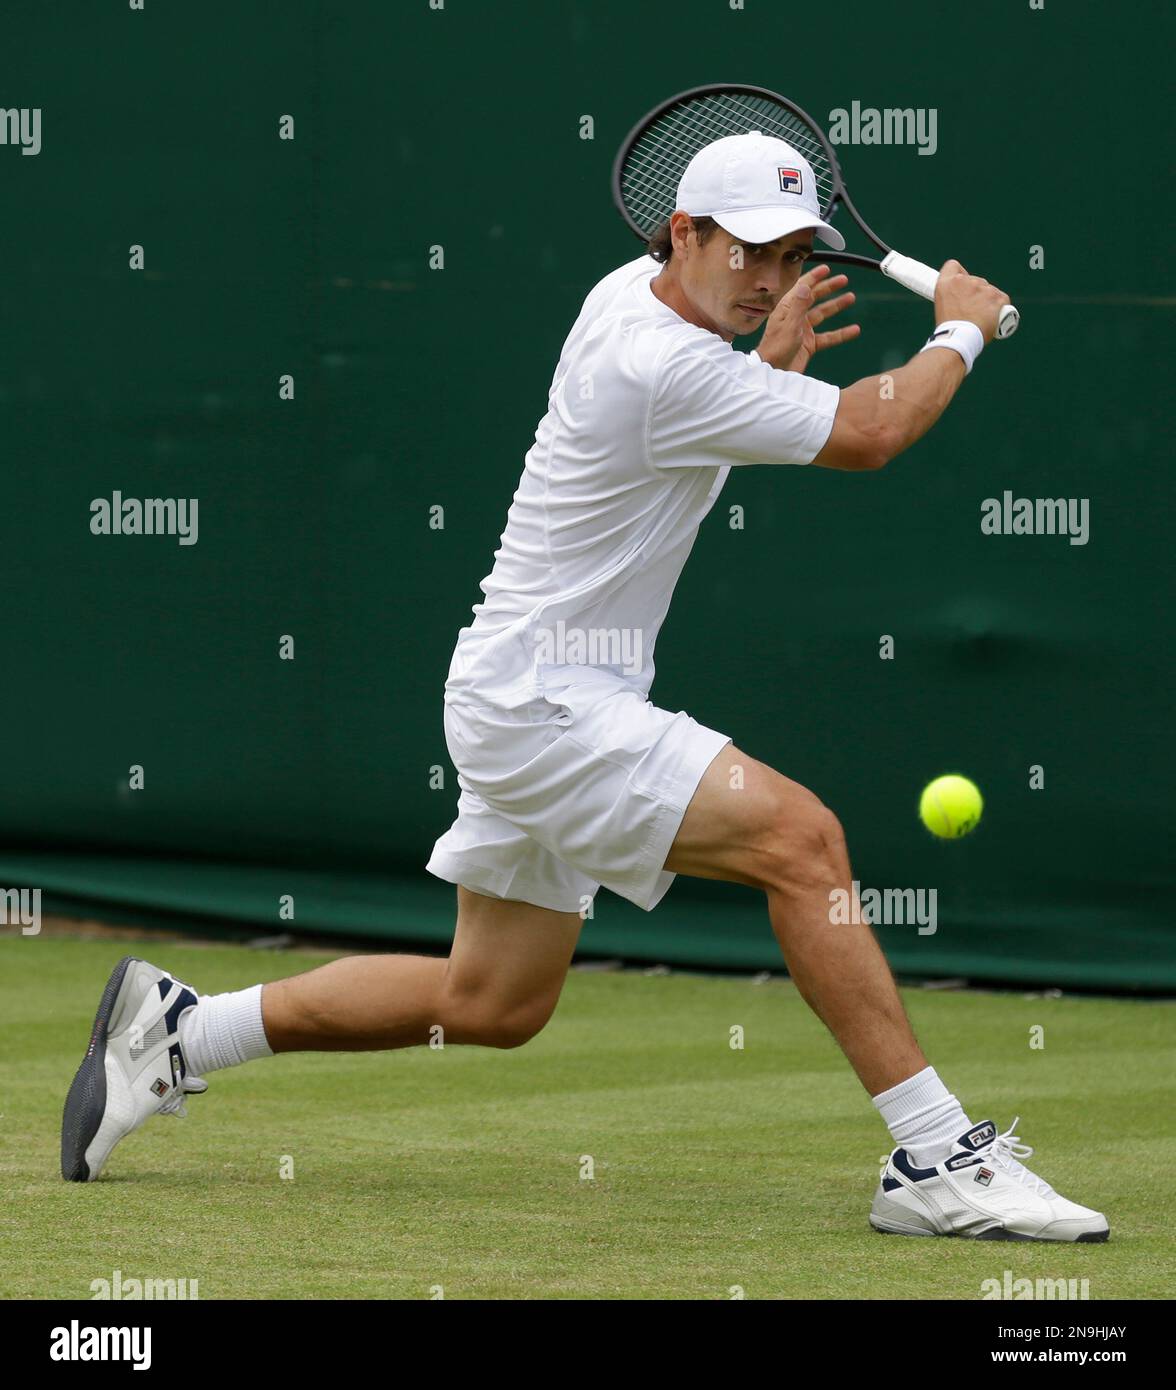 Igor Kunitsyn of Russia returns a shot against Go Soeda of Japan during a  first round men's singles match at the All England Lawn Tennis  Championships at Wimbledon, England, Tuesday, June 26,